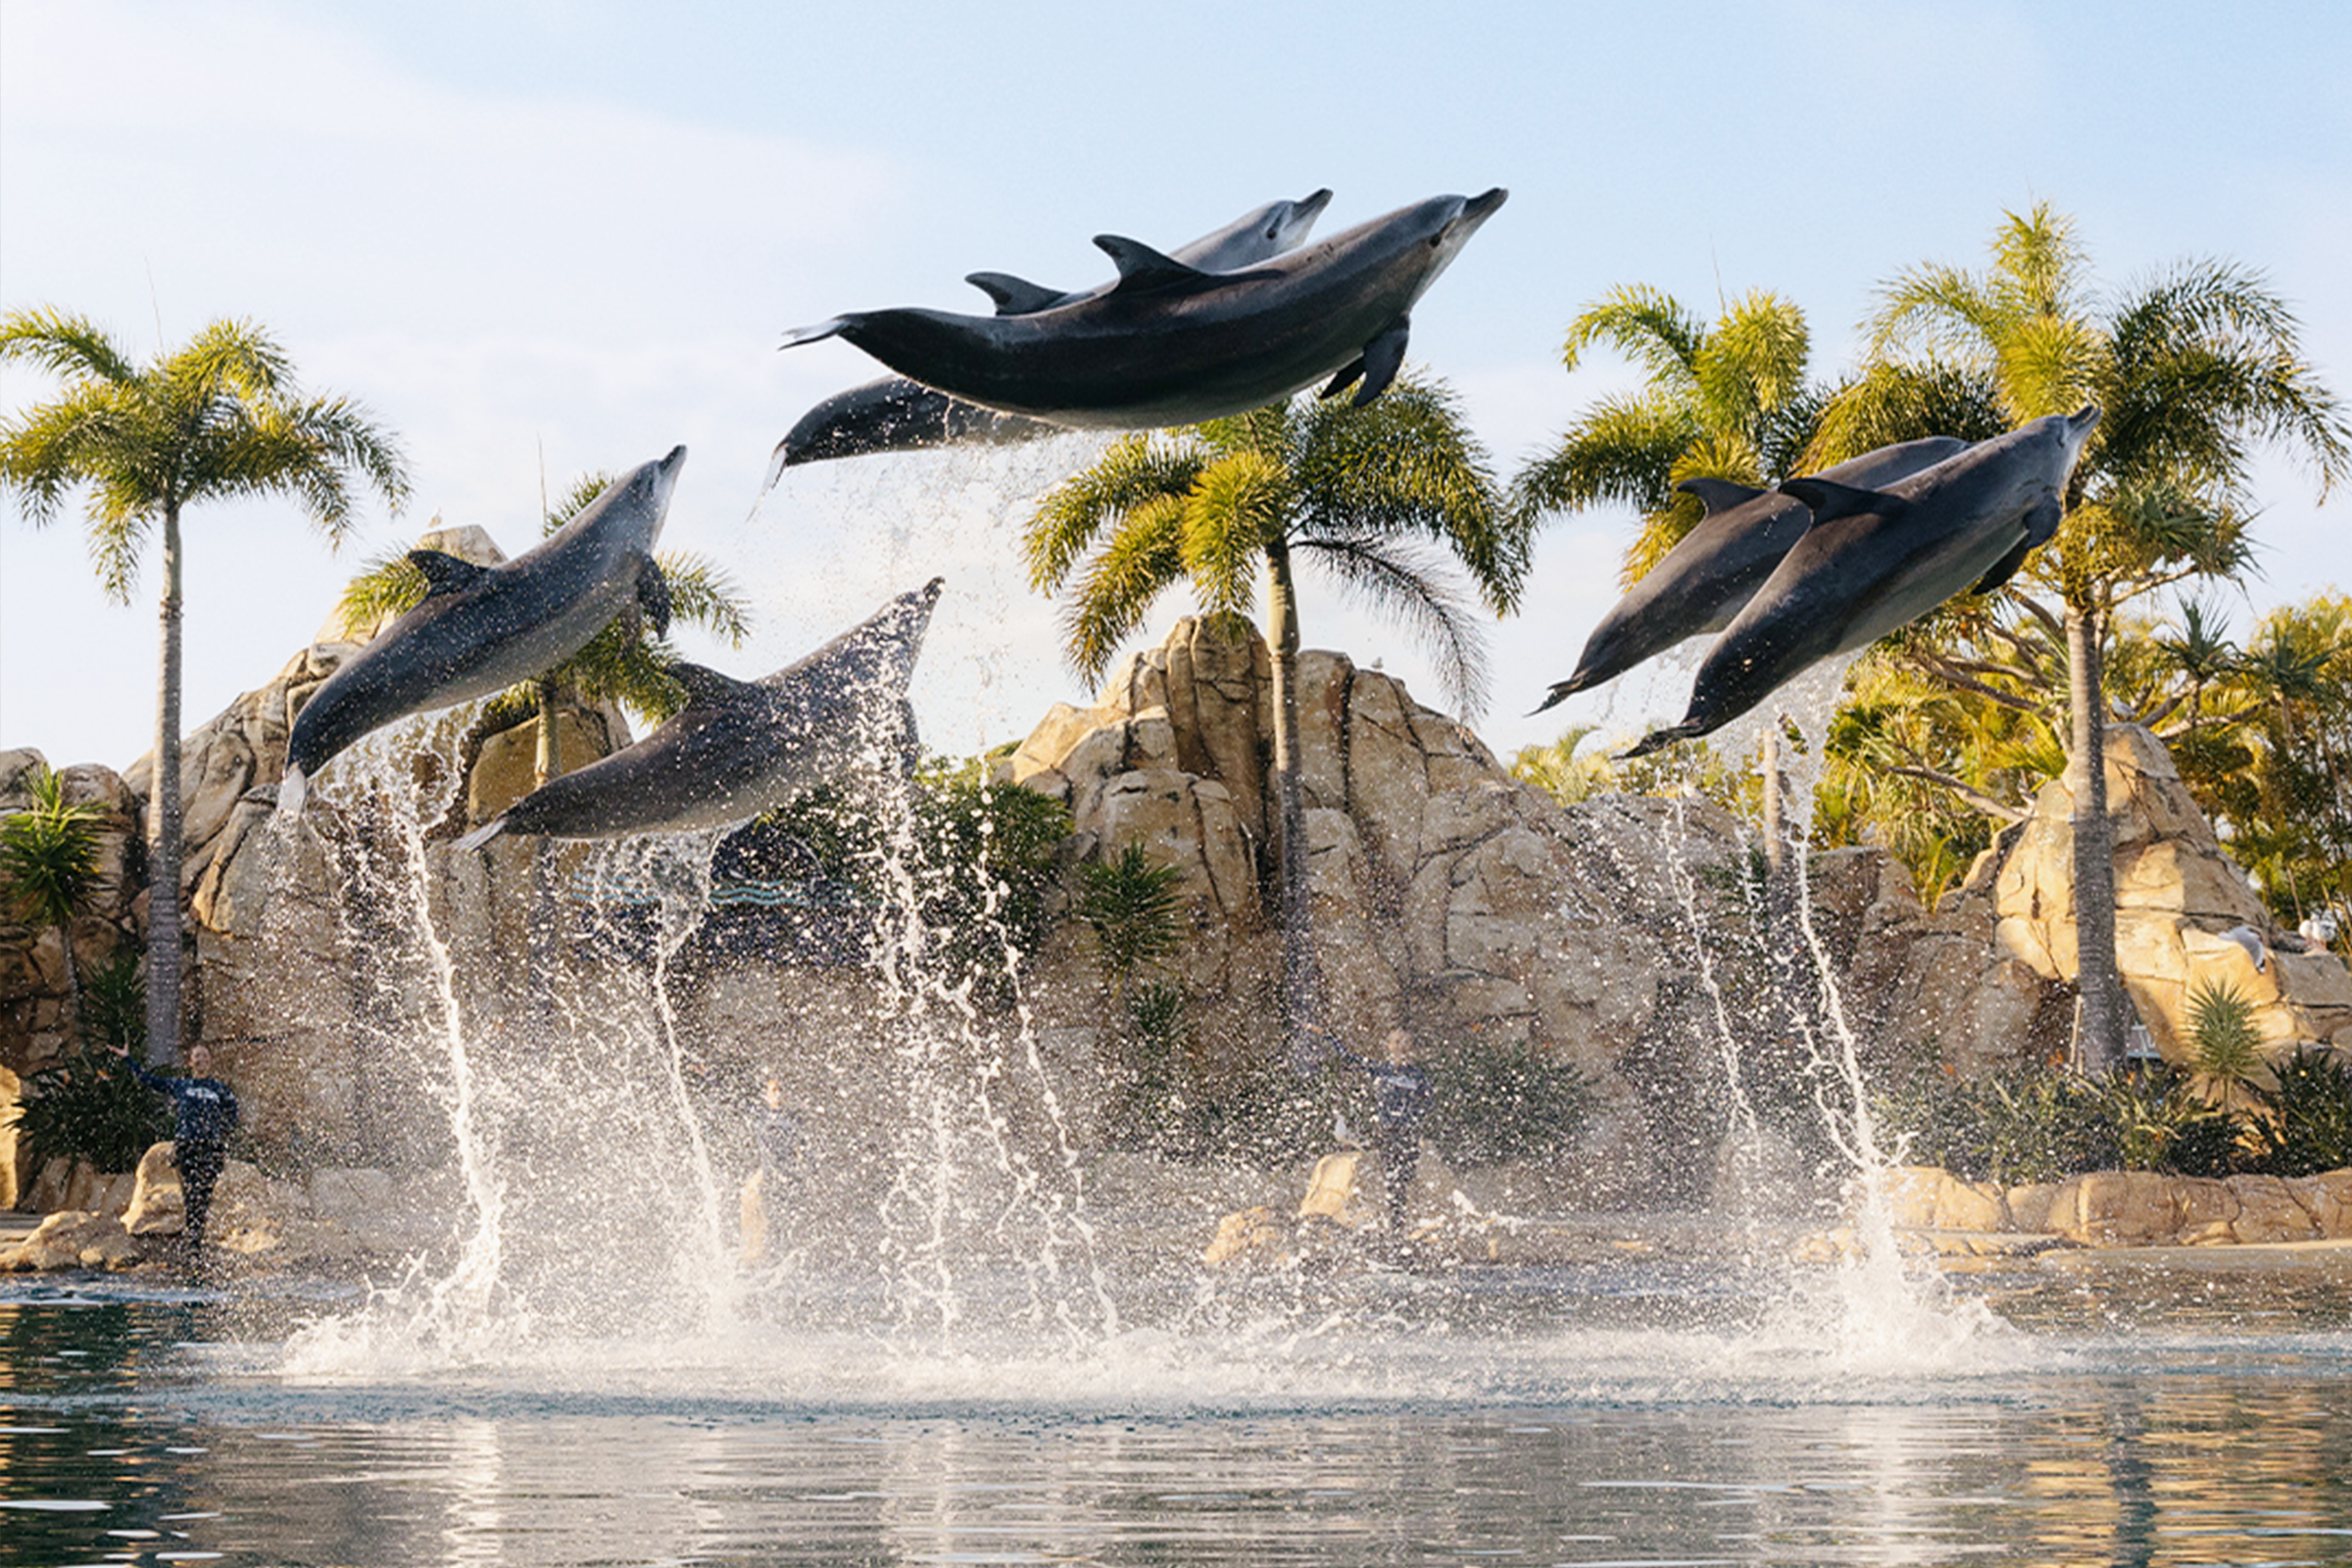 Dolphins leaping into air.